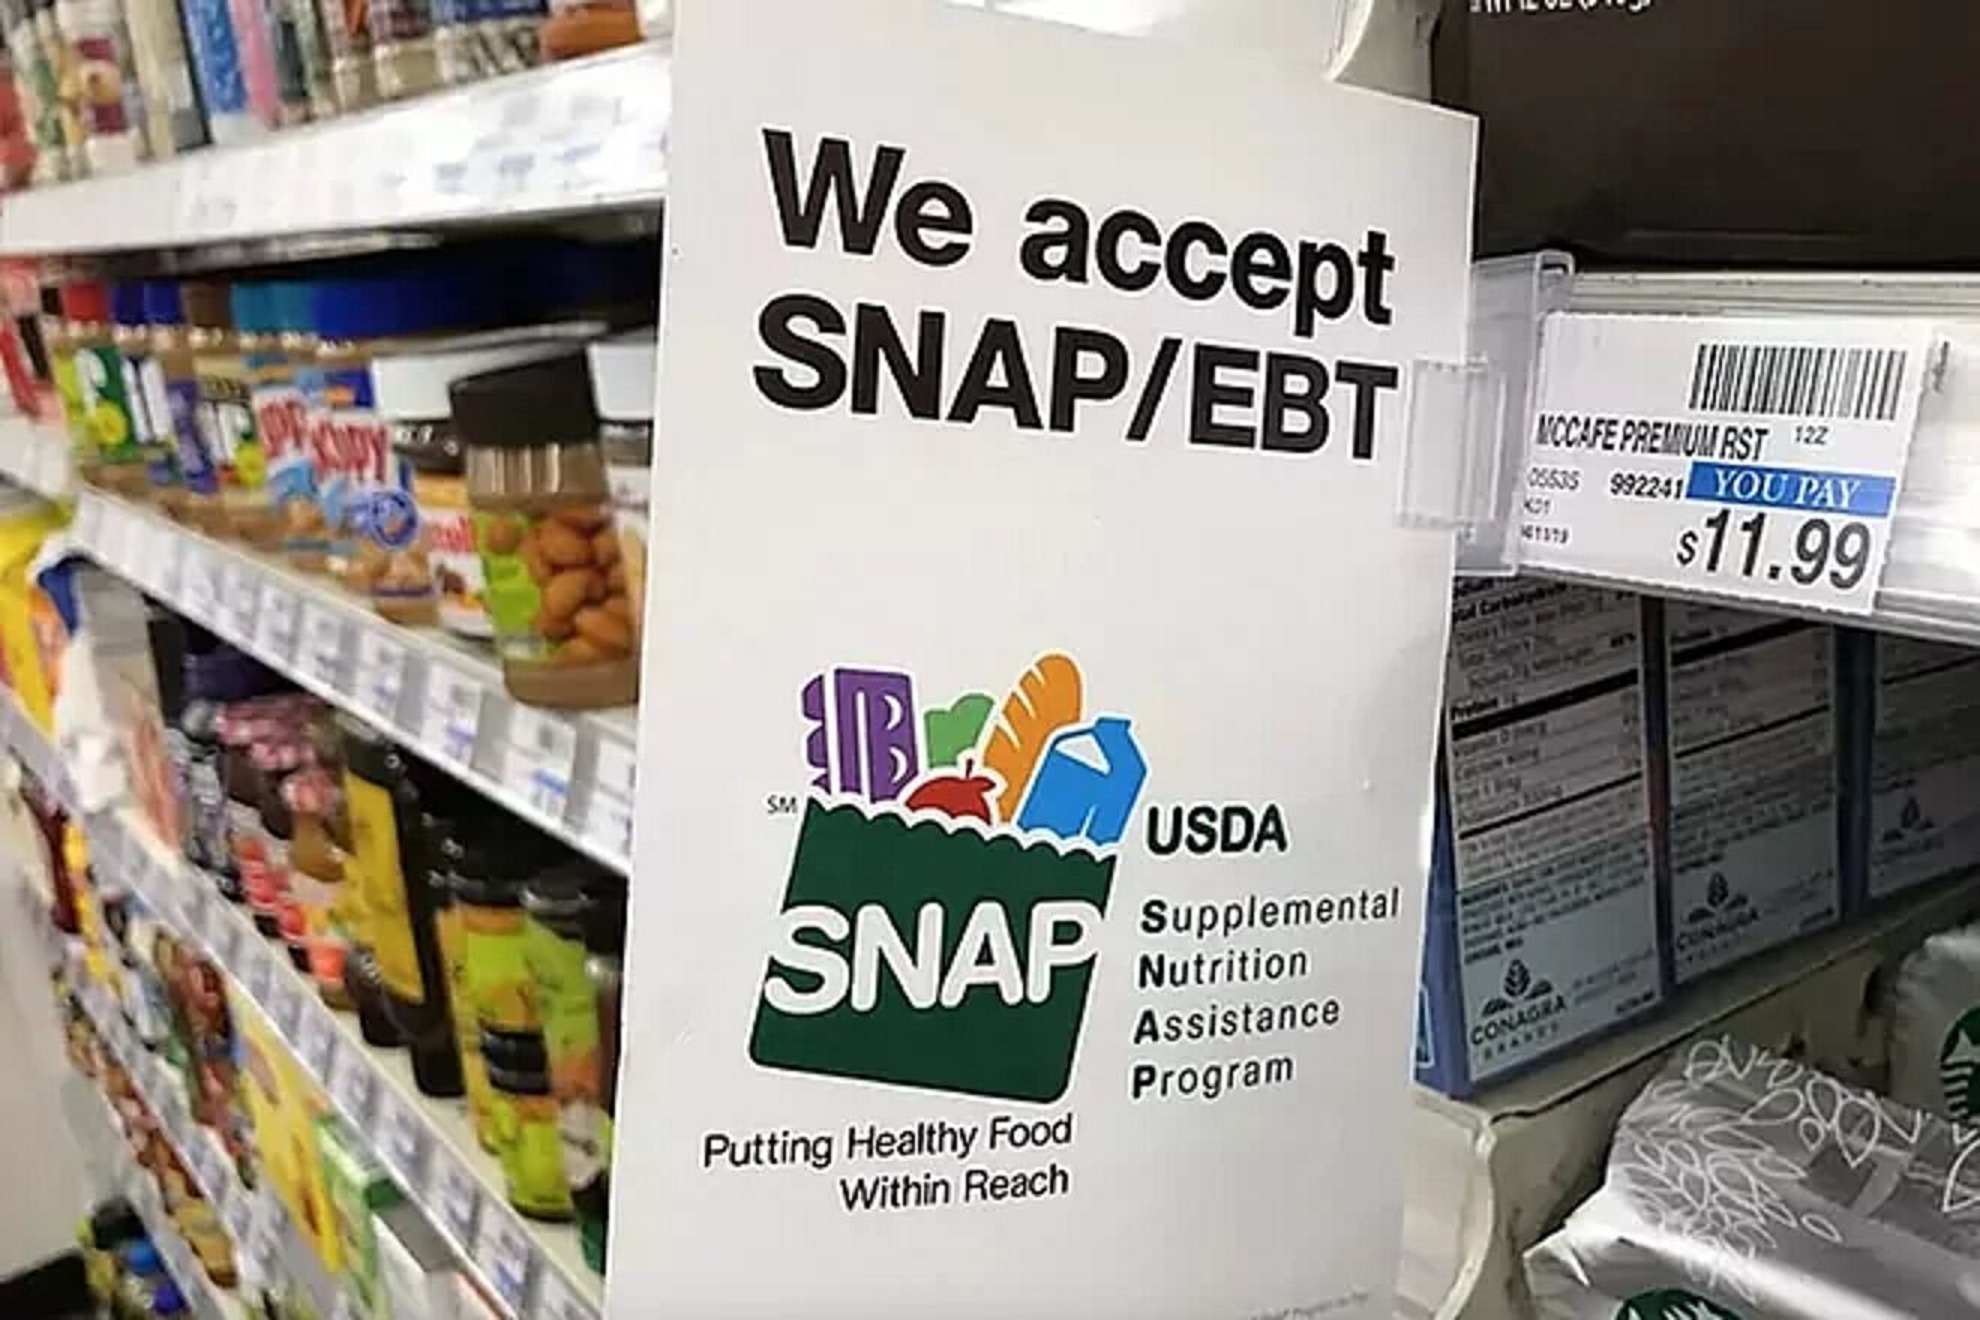 Can you apply for the SNAP program if you dont have a job?